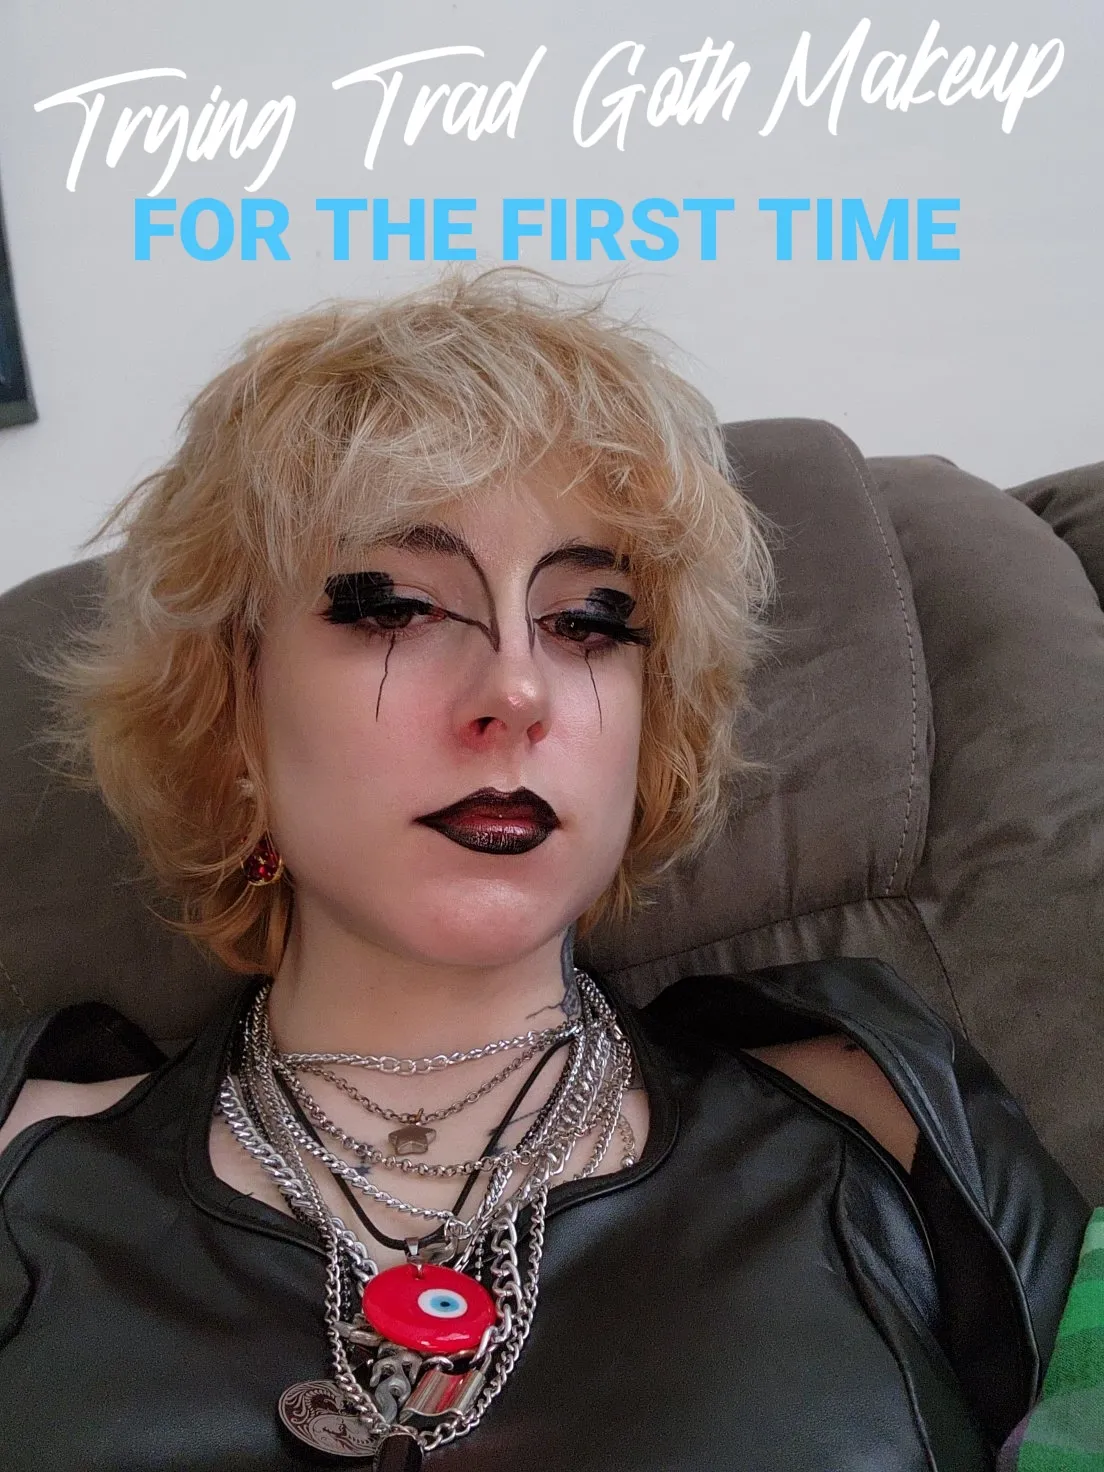 Trying Trad Goth Makeup For The First